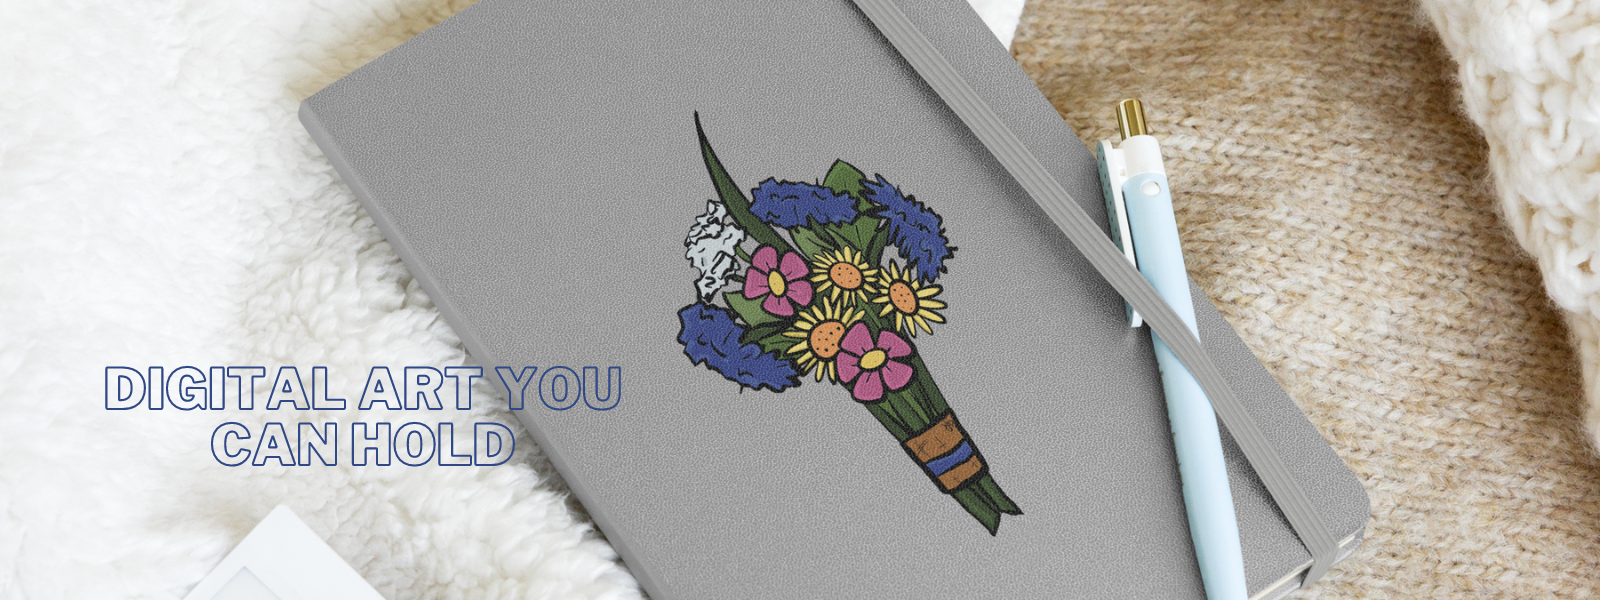 A close up shot of the bouquet art print hardcover notebook and text saying, "Digital art you can hold"